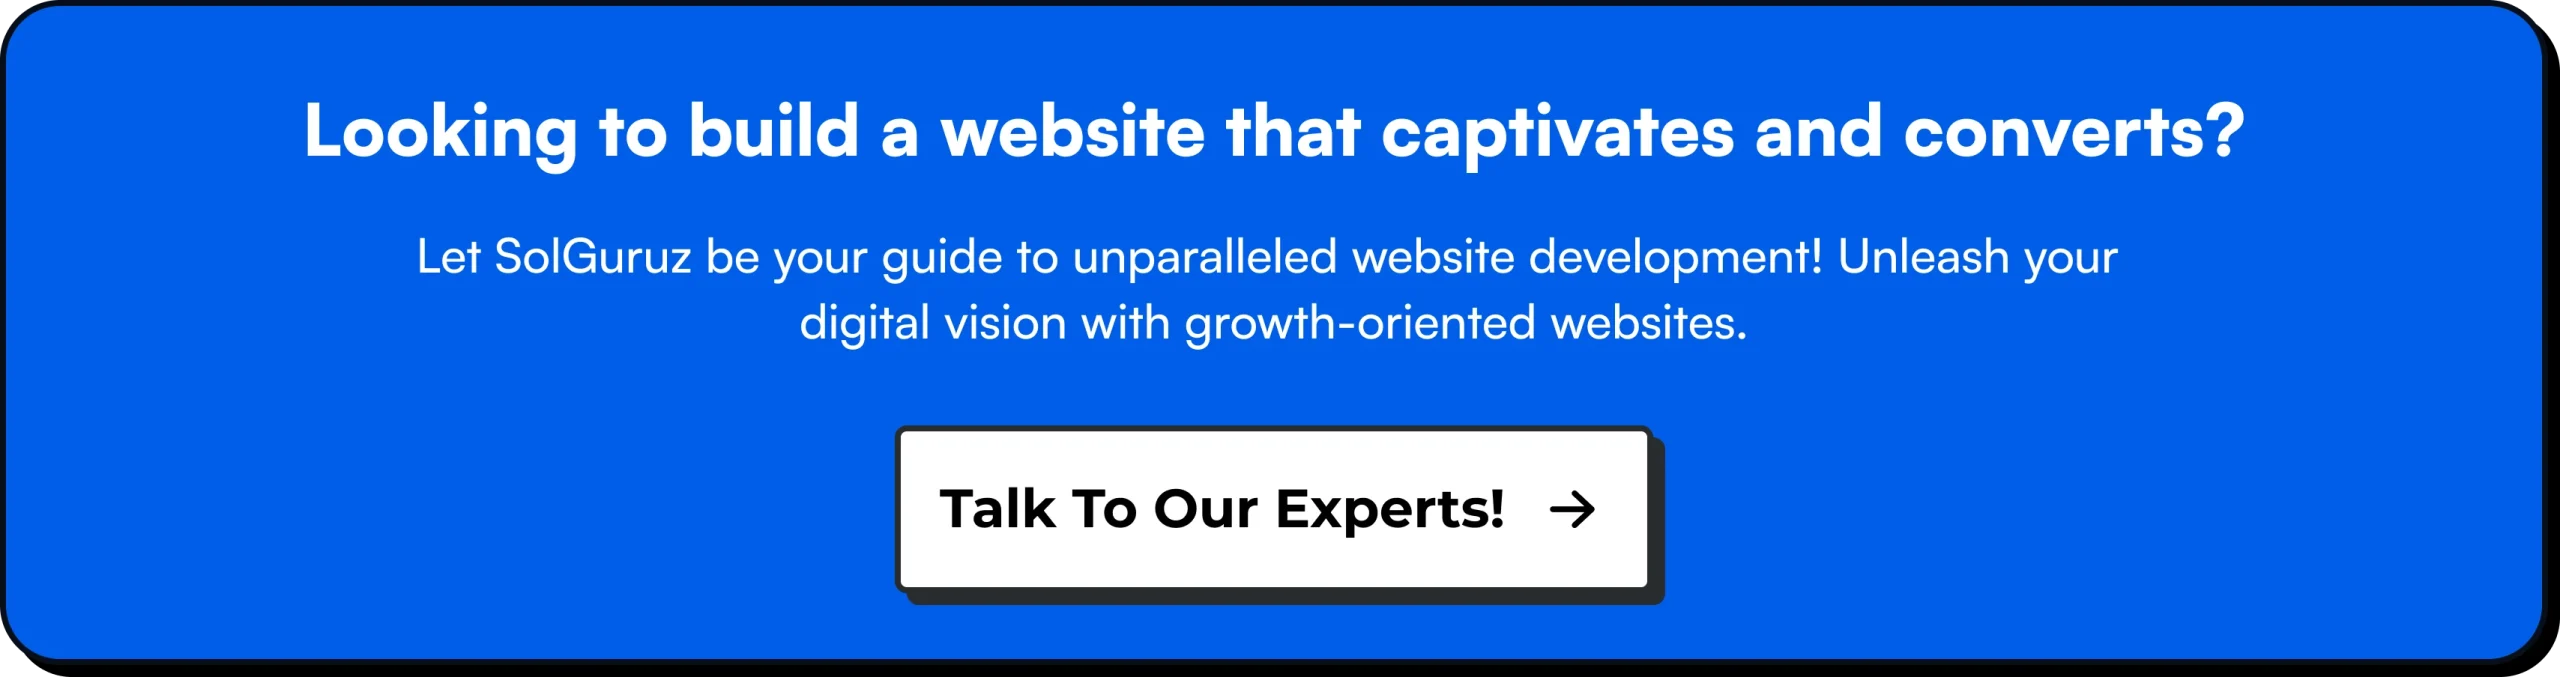 looking to build a website that captivates and converts